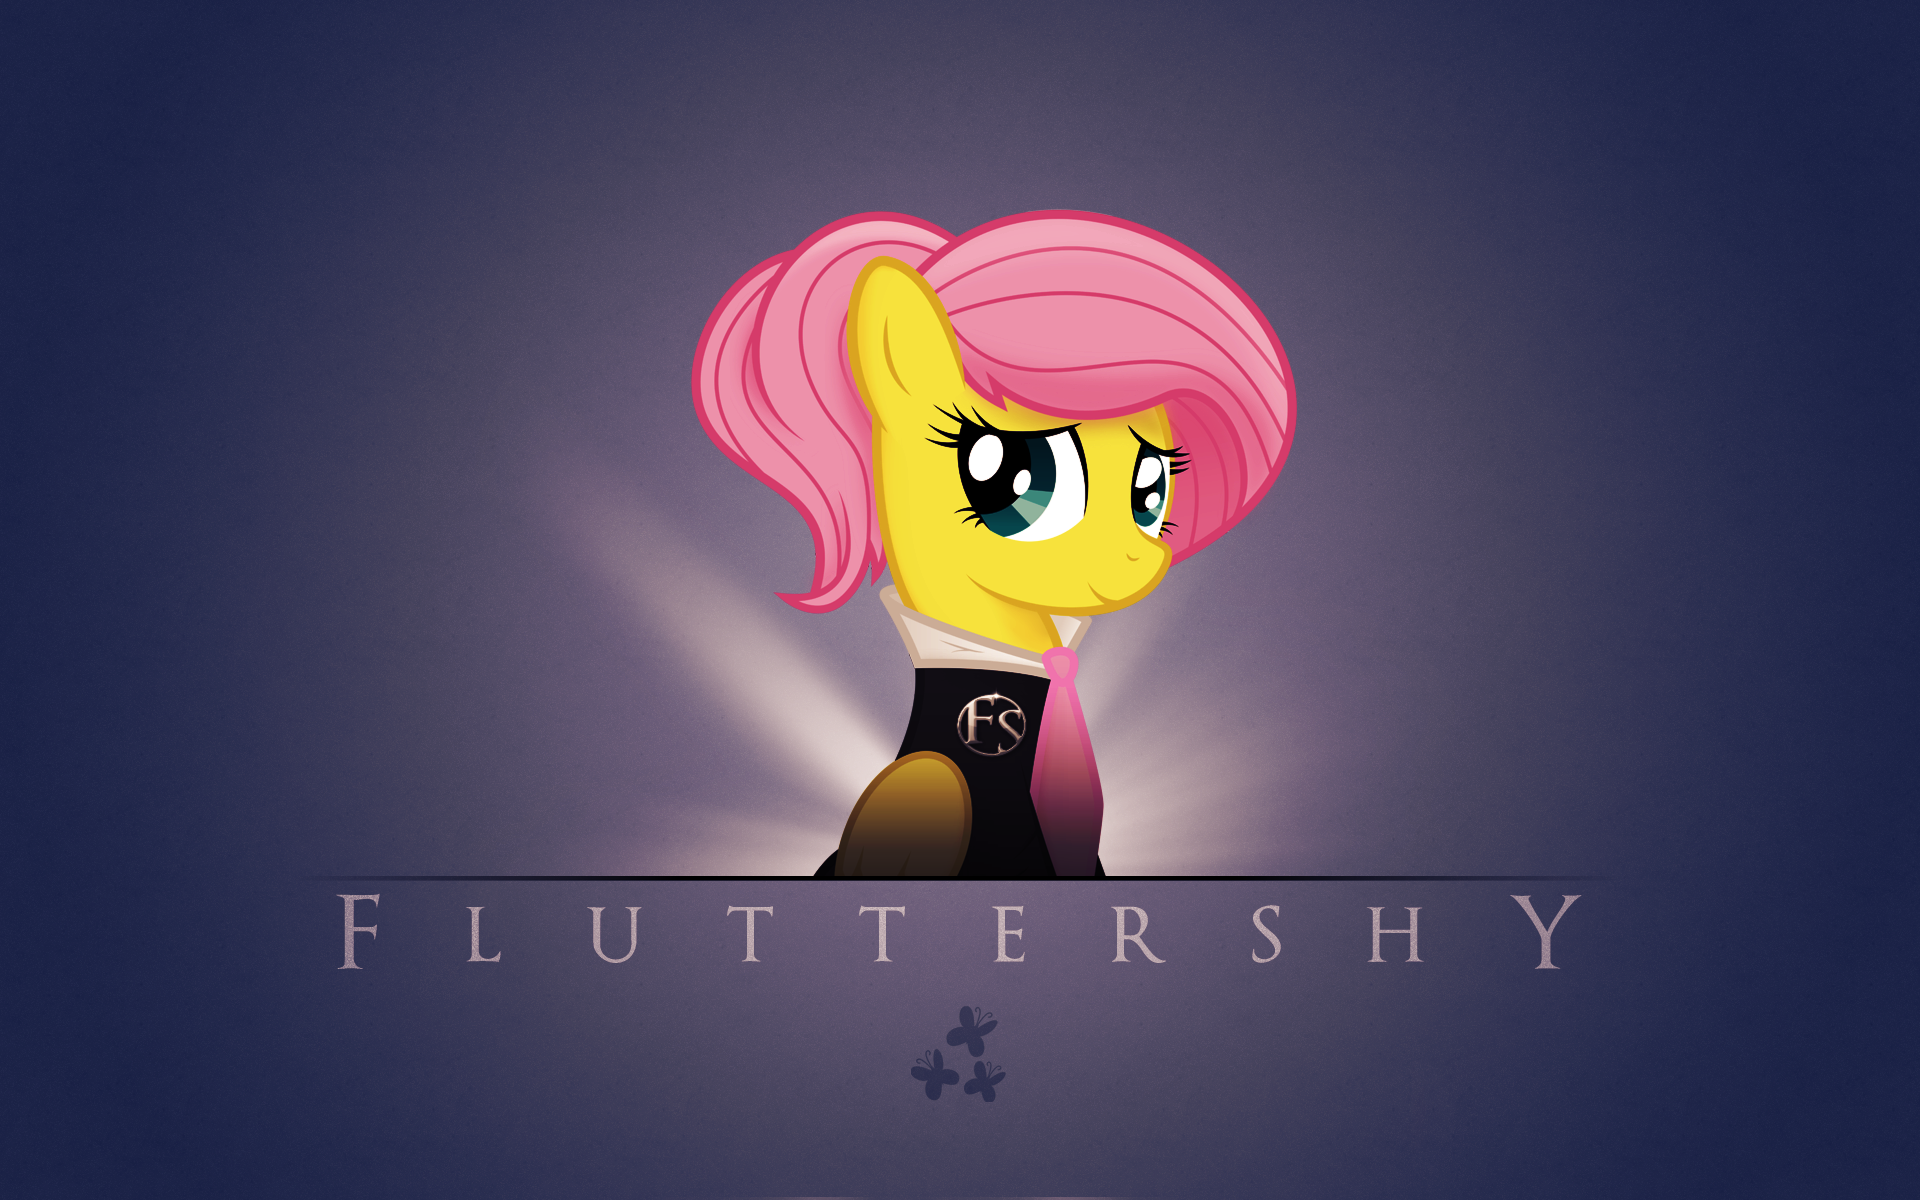 Fluttersuit by Tim015 and Vexx3